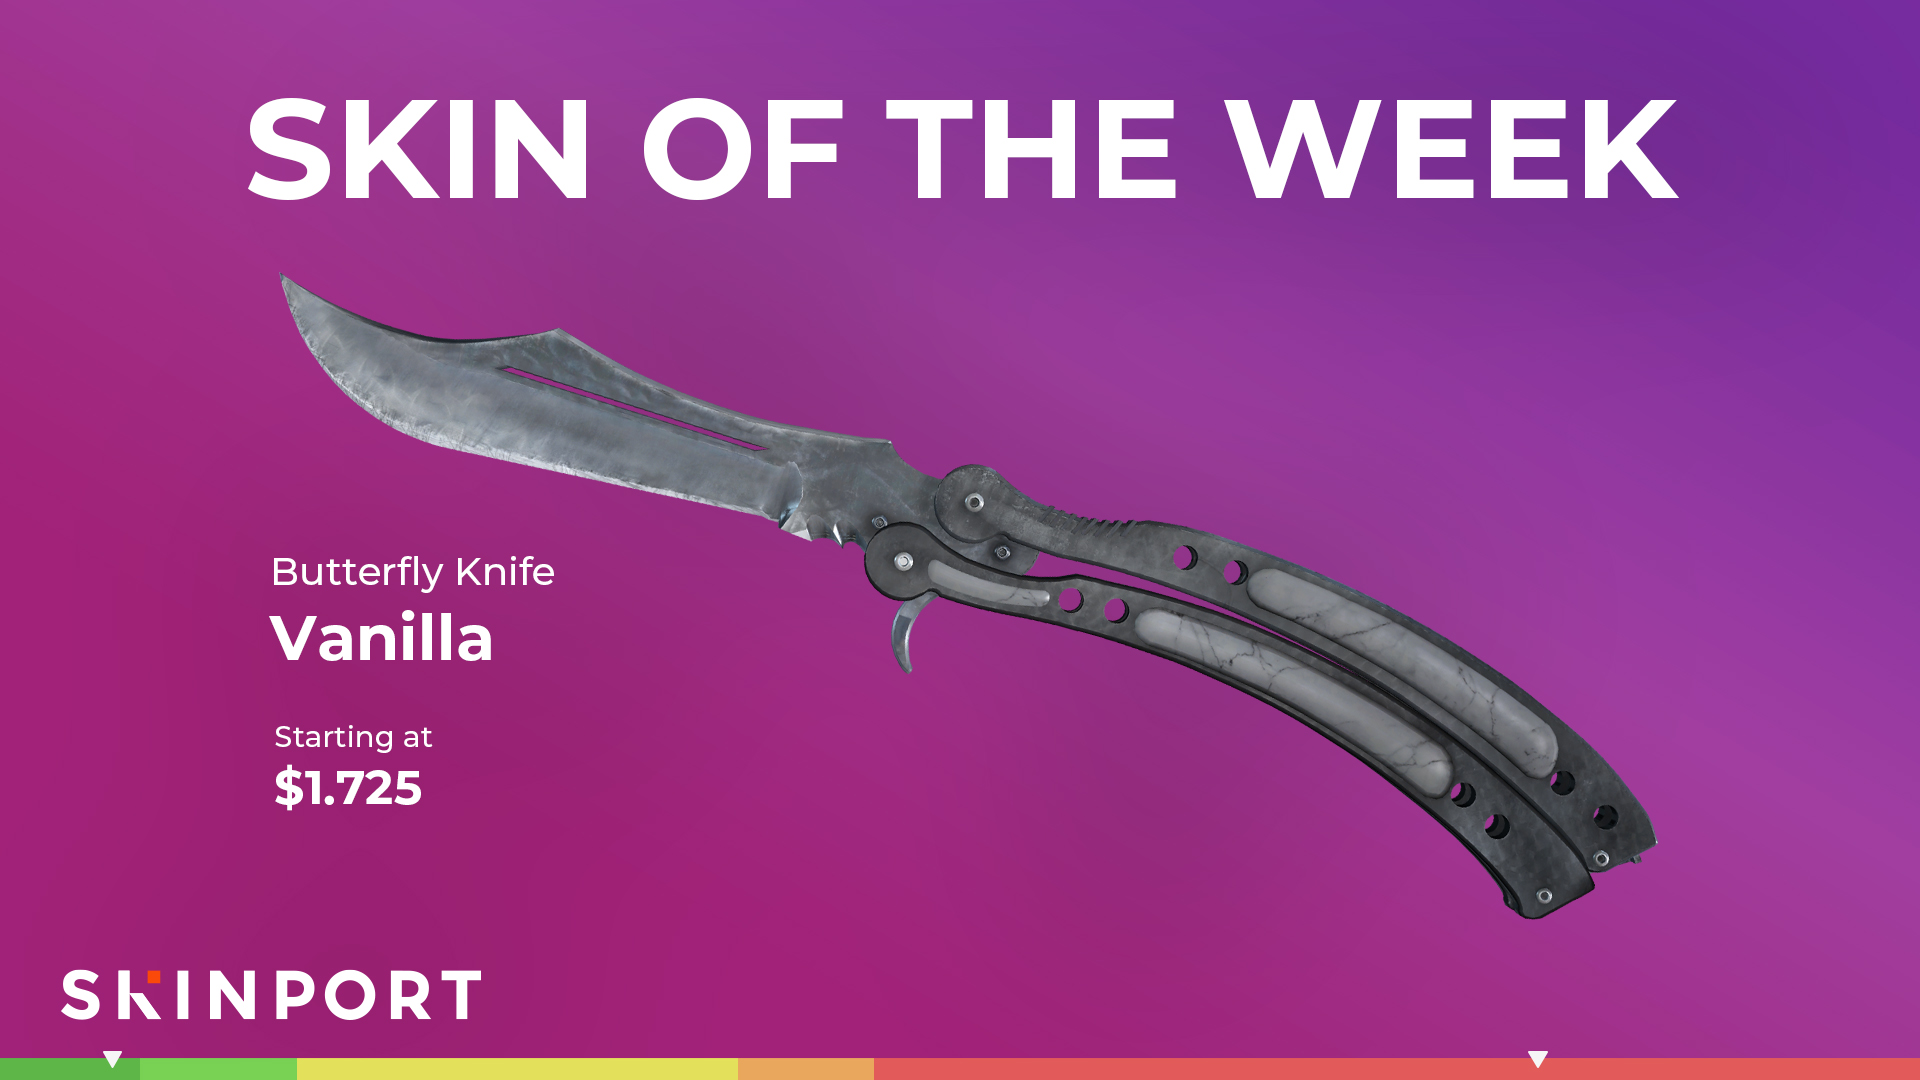 Mark tøj Samuel Skinport on Twitter: "Skin of the Week: Butterfly Vanilla. One of the most  popular knives of all time with constantly increasing value. What do you  think about this skin? https://t.co/dqjZi9C2dT" / Twitter